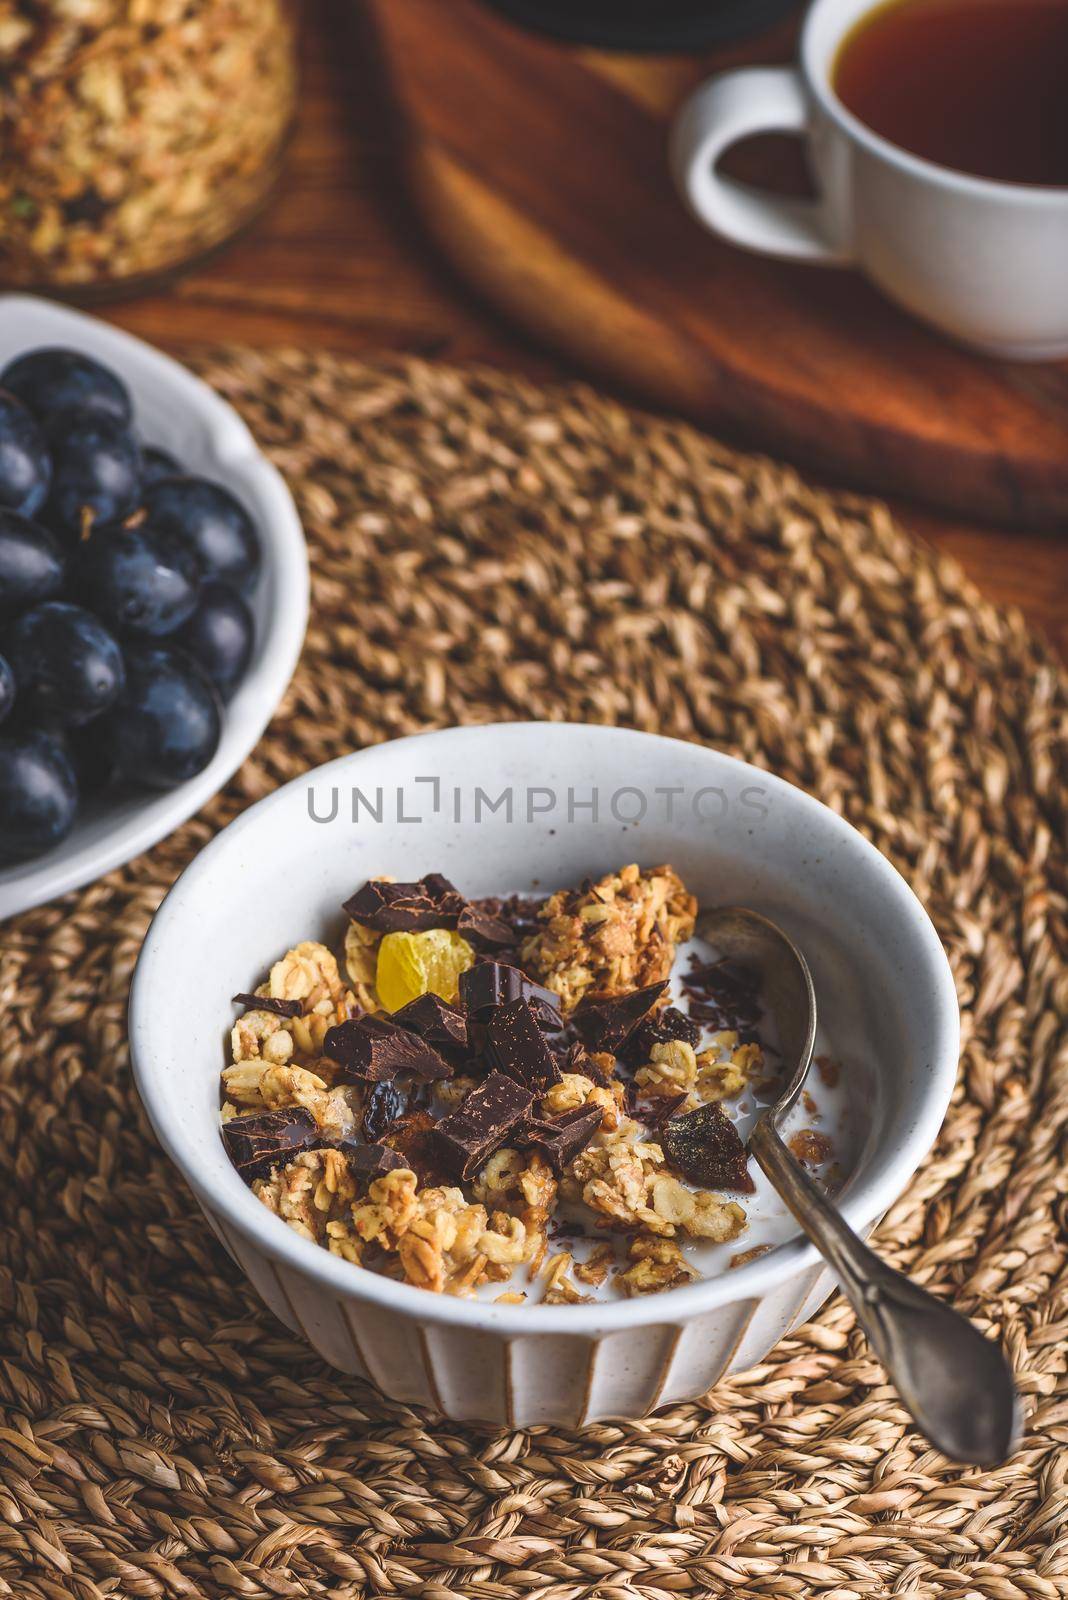 Bowl of Homemade Granola with Dried Fruits and Crushed Chocolate, Cup of Coffee and Fresh Grape for Breakfast